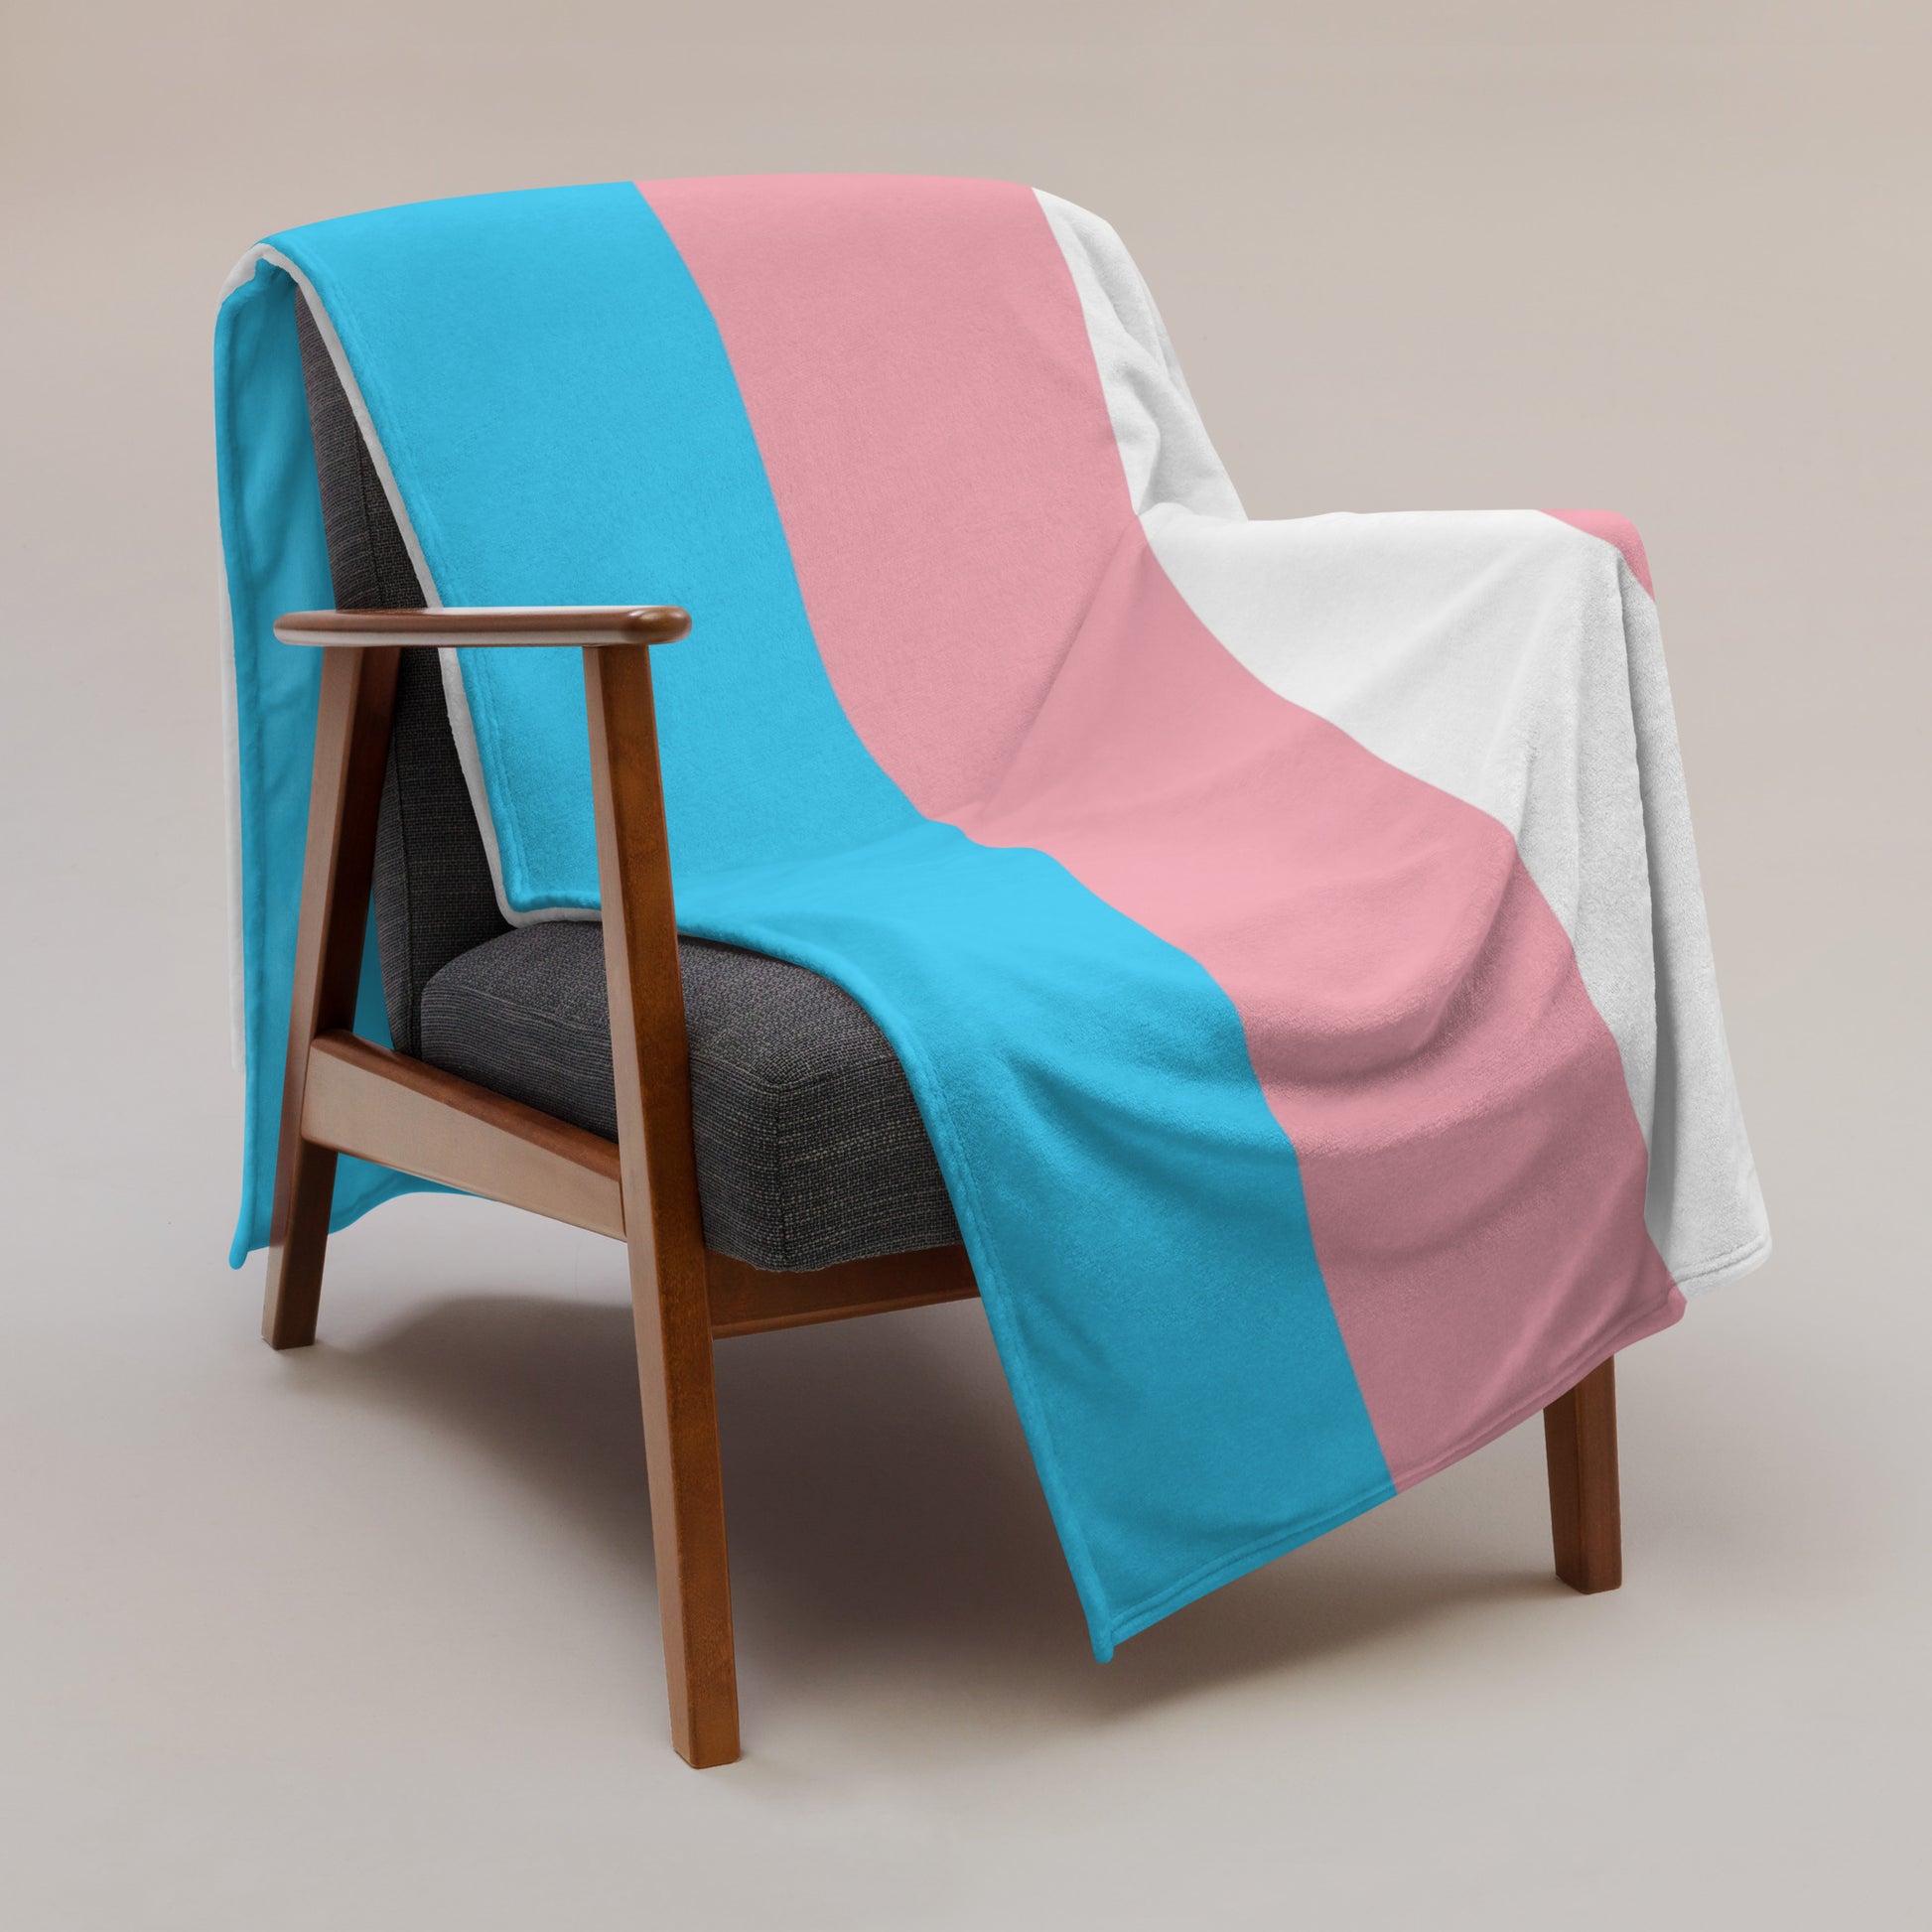 Soft throw blanket hanging over an arm chair. Transgender pride flag colors with beautiful stained glass affect print